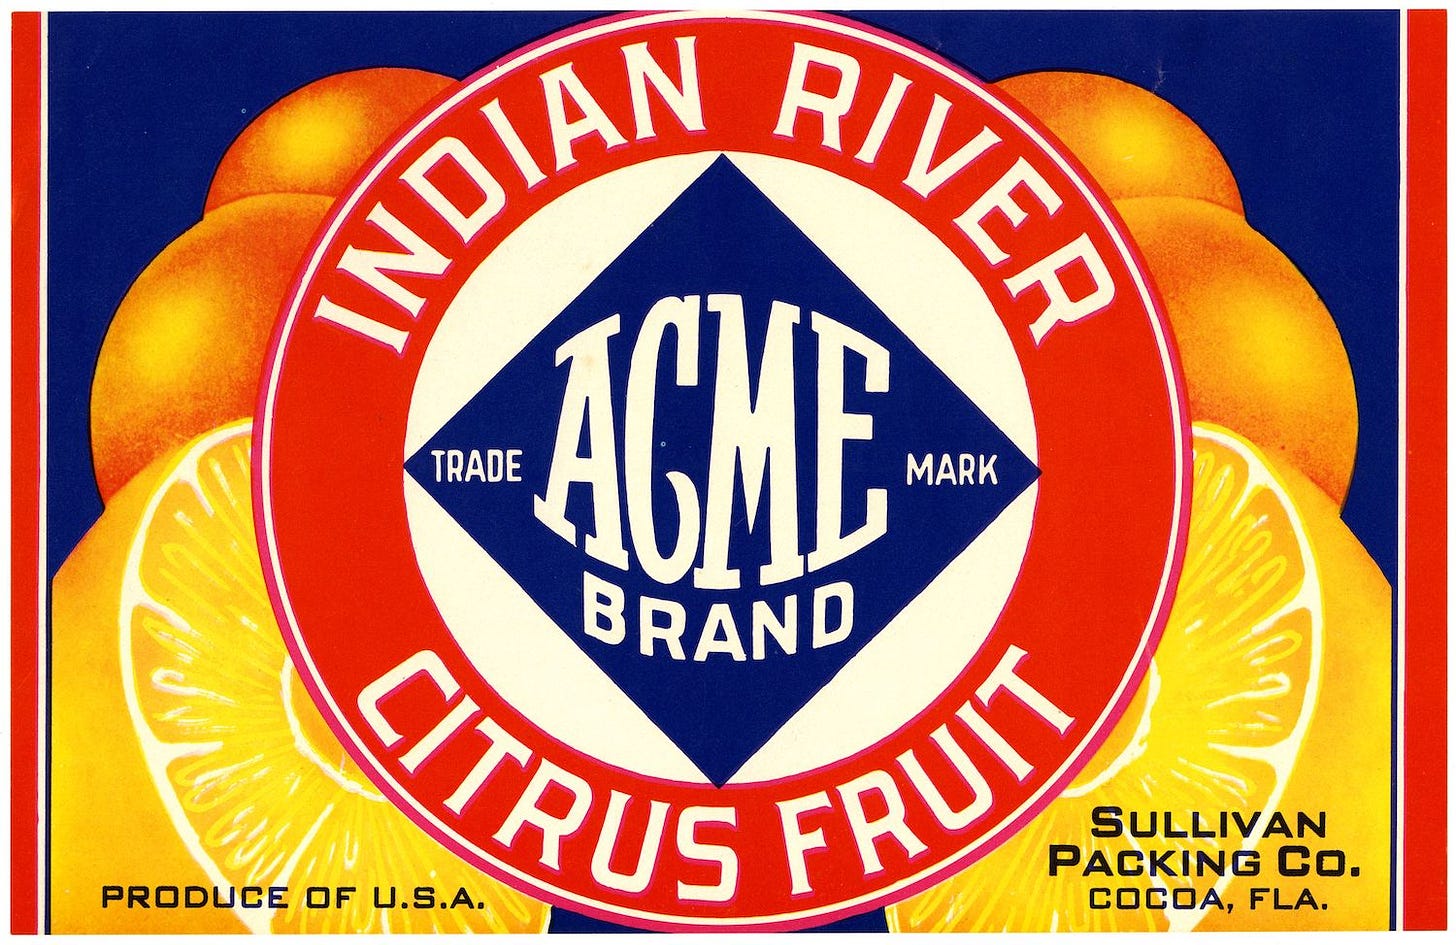 Oranges against a blue background with the Acme Brand logo